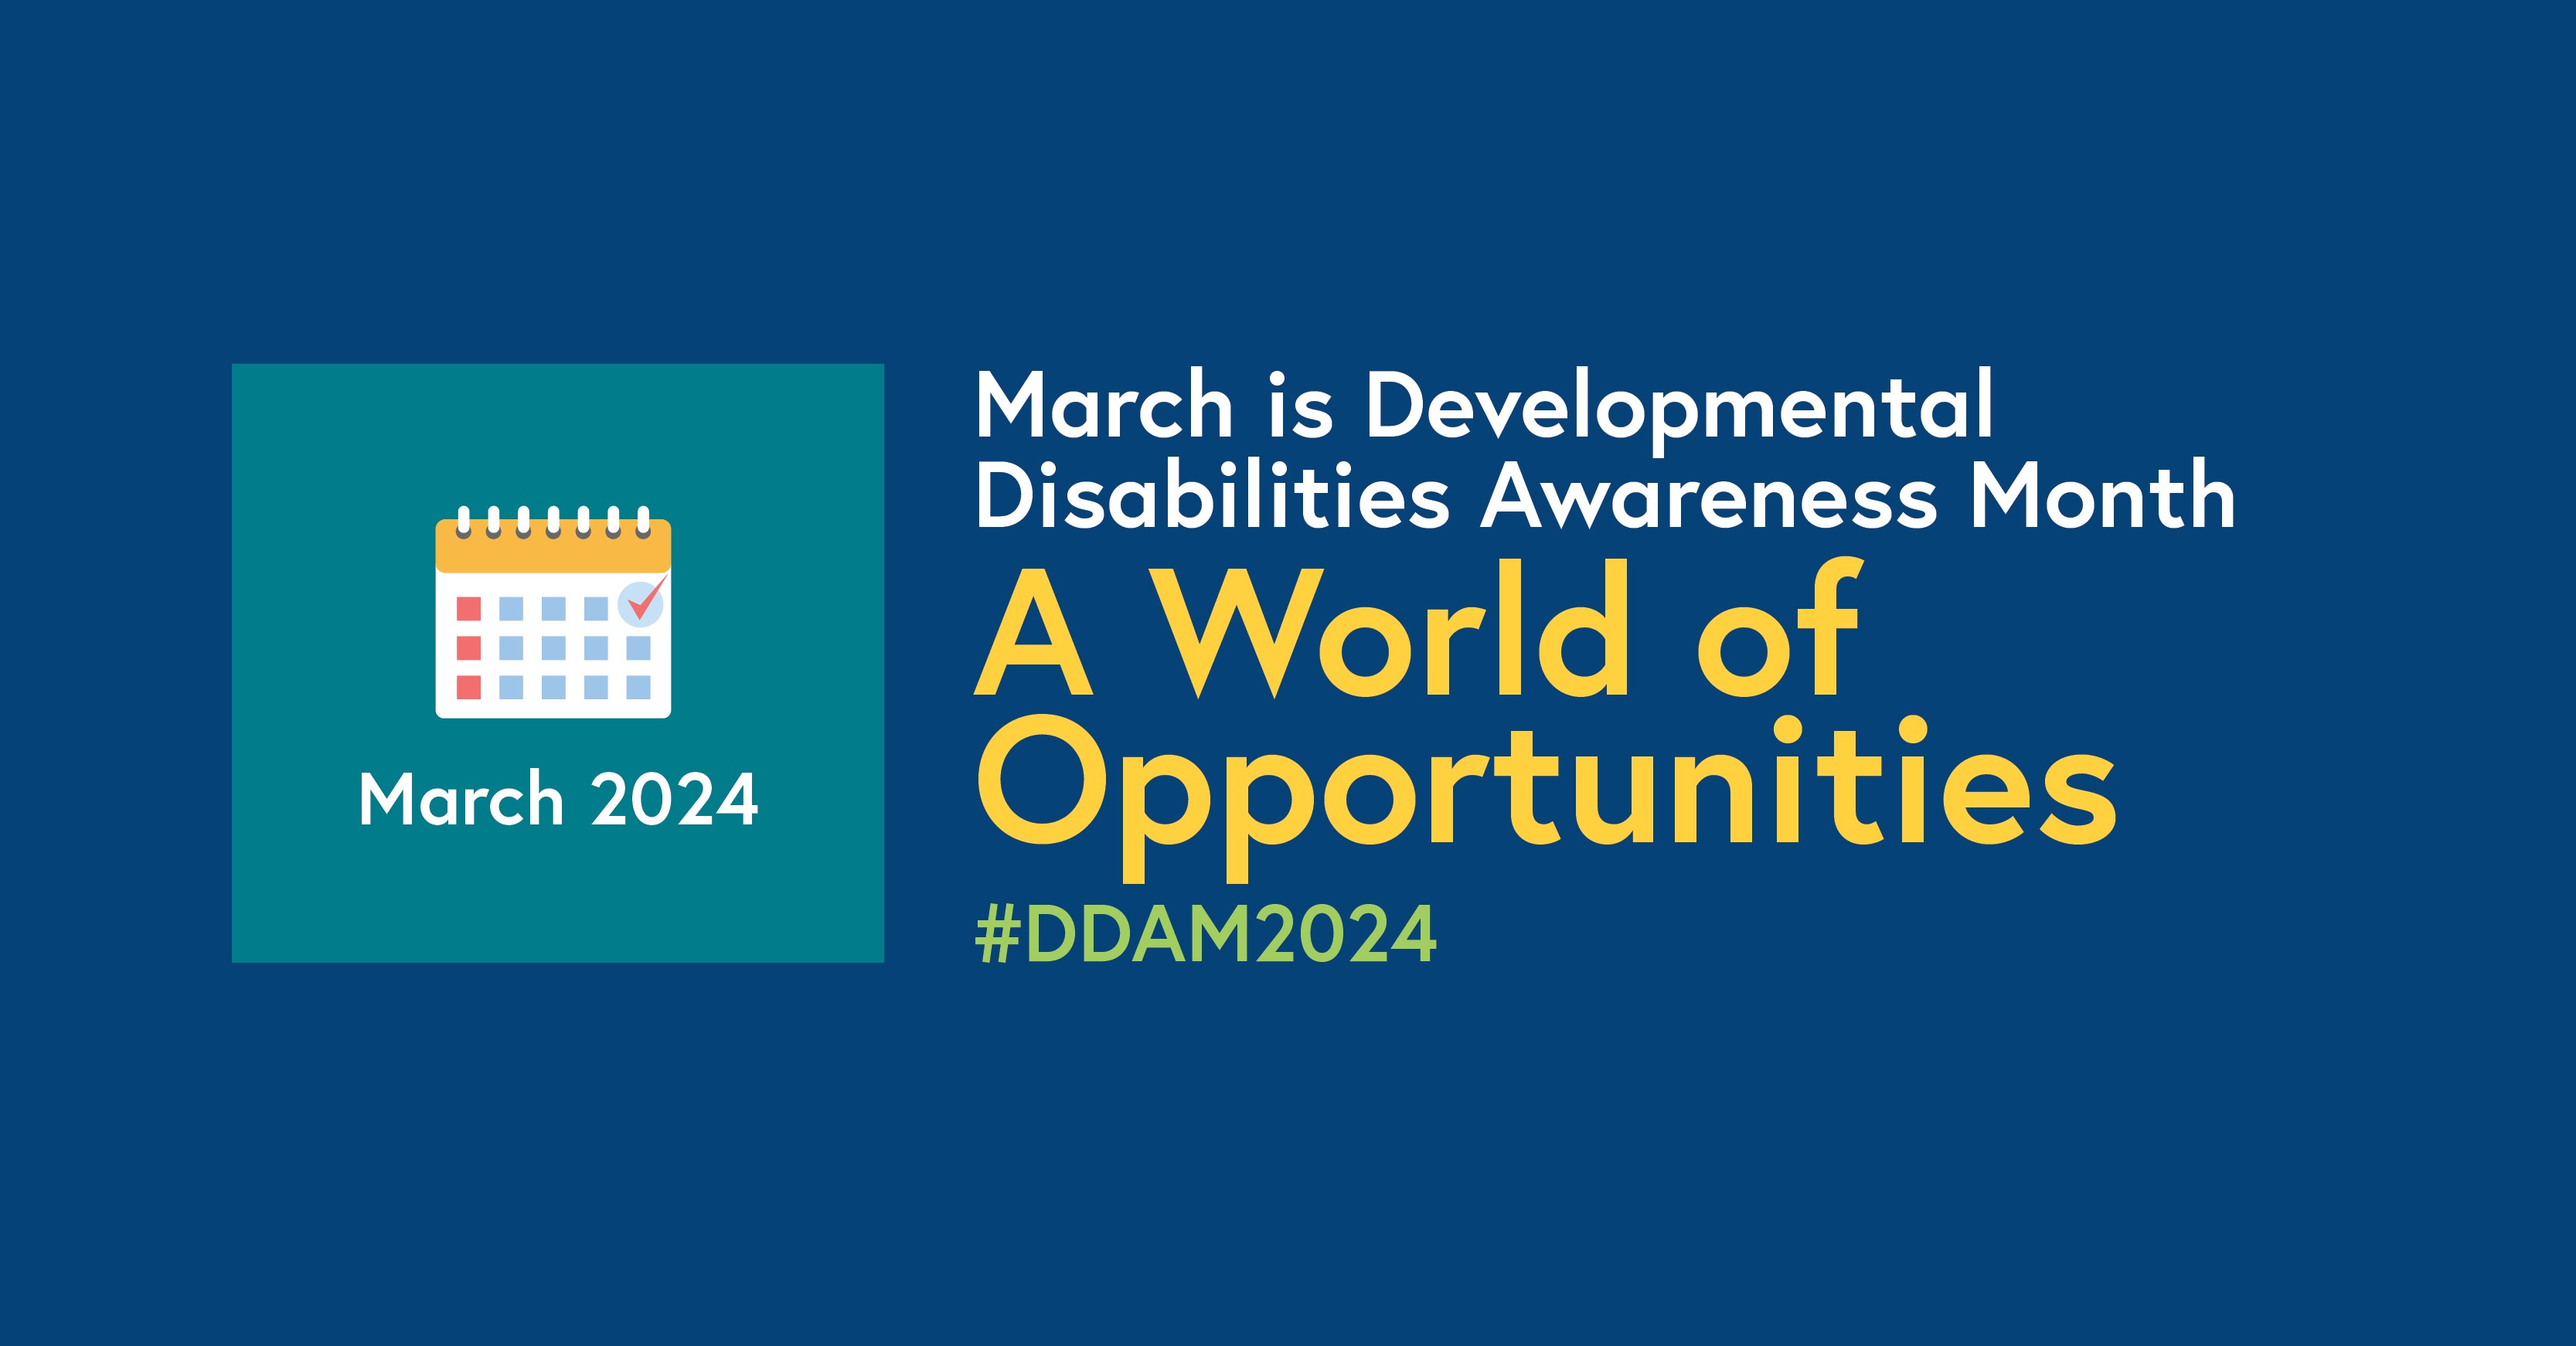 Calendar icon on blue background with wording: March is Developmental Disabilities Awaresness Month, March 2024, A World of Opportunities. #DDAM2024